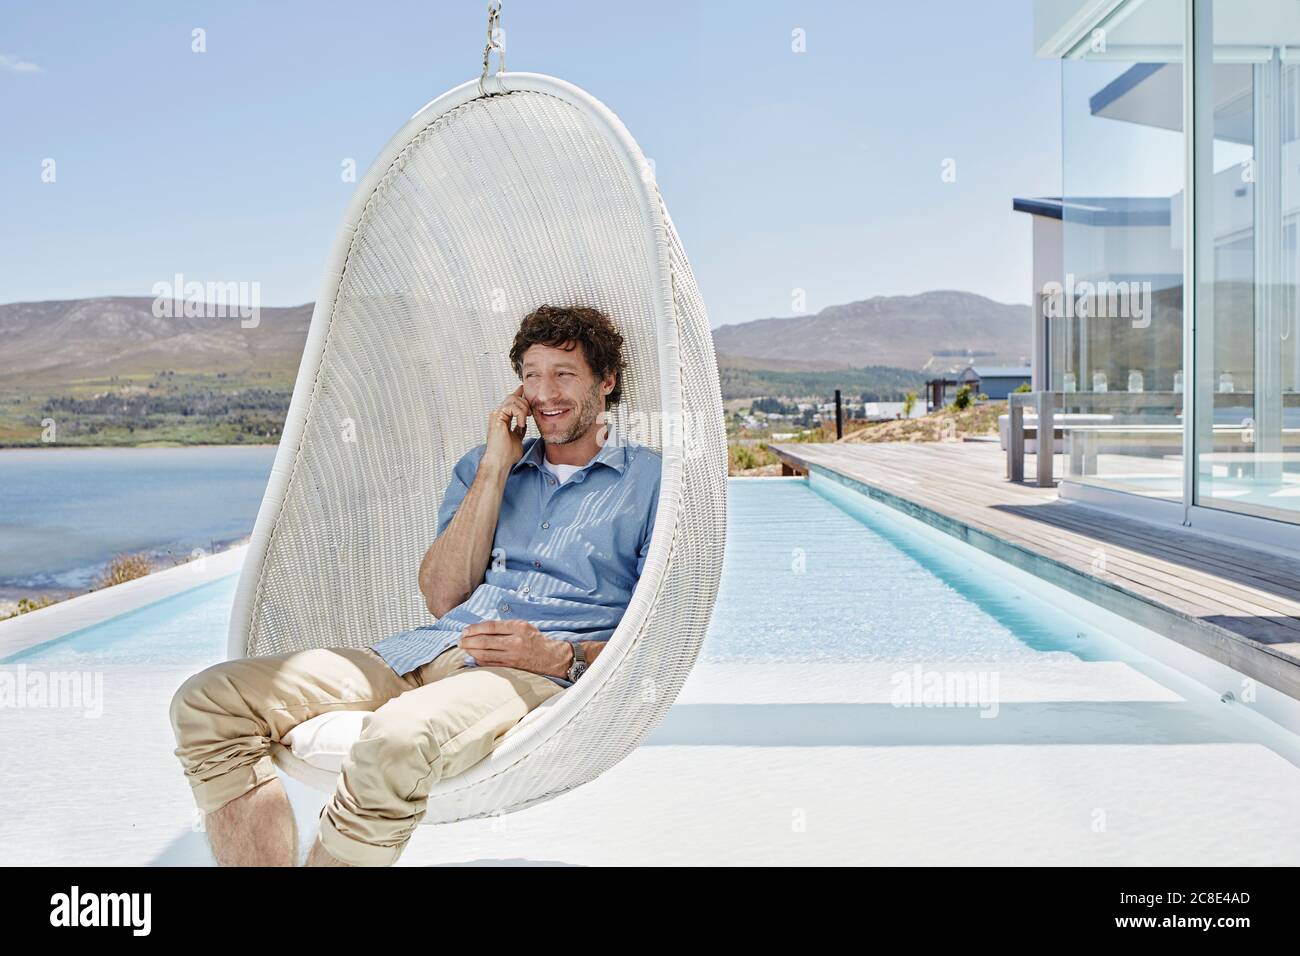 Man sitting in hanging chair above swimming pool talking on the phone Stock Photo